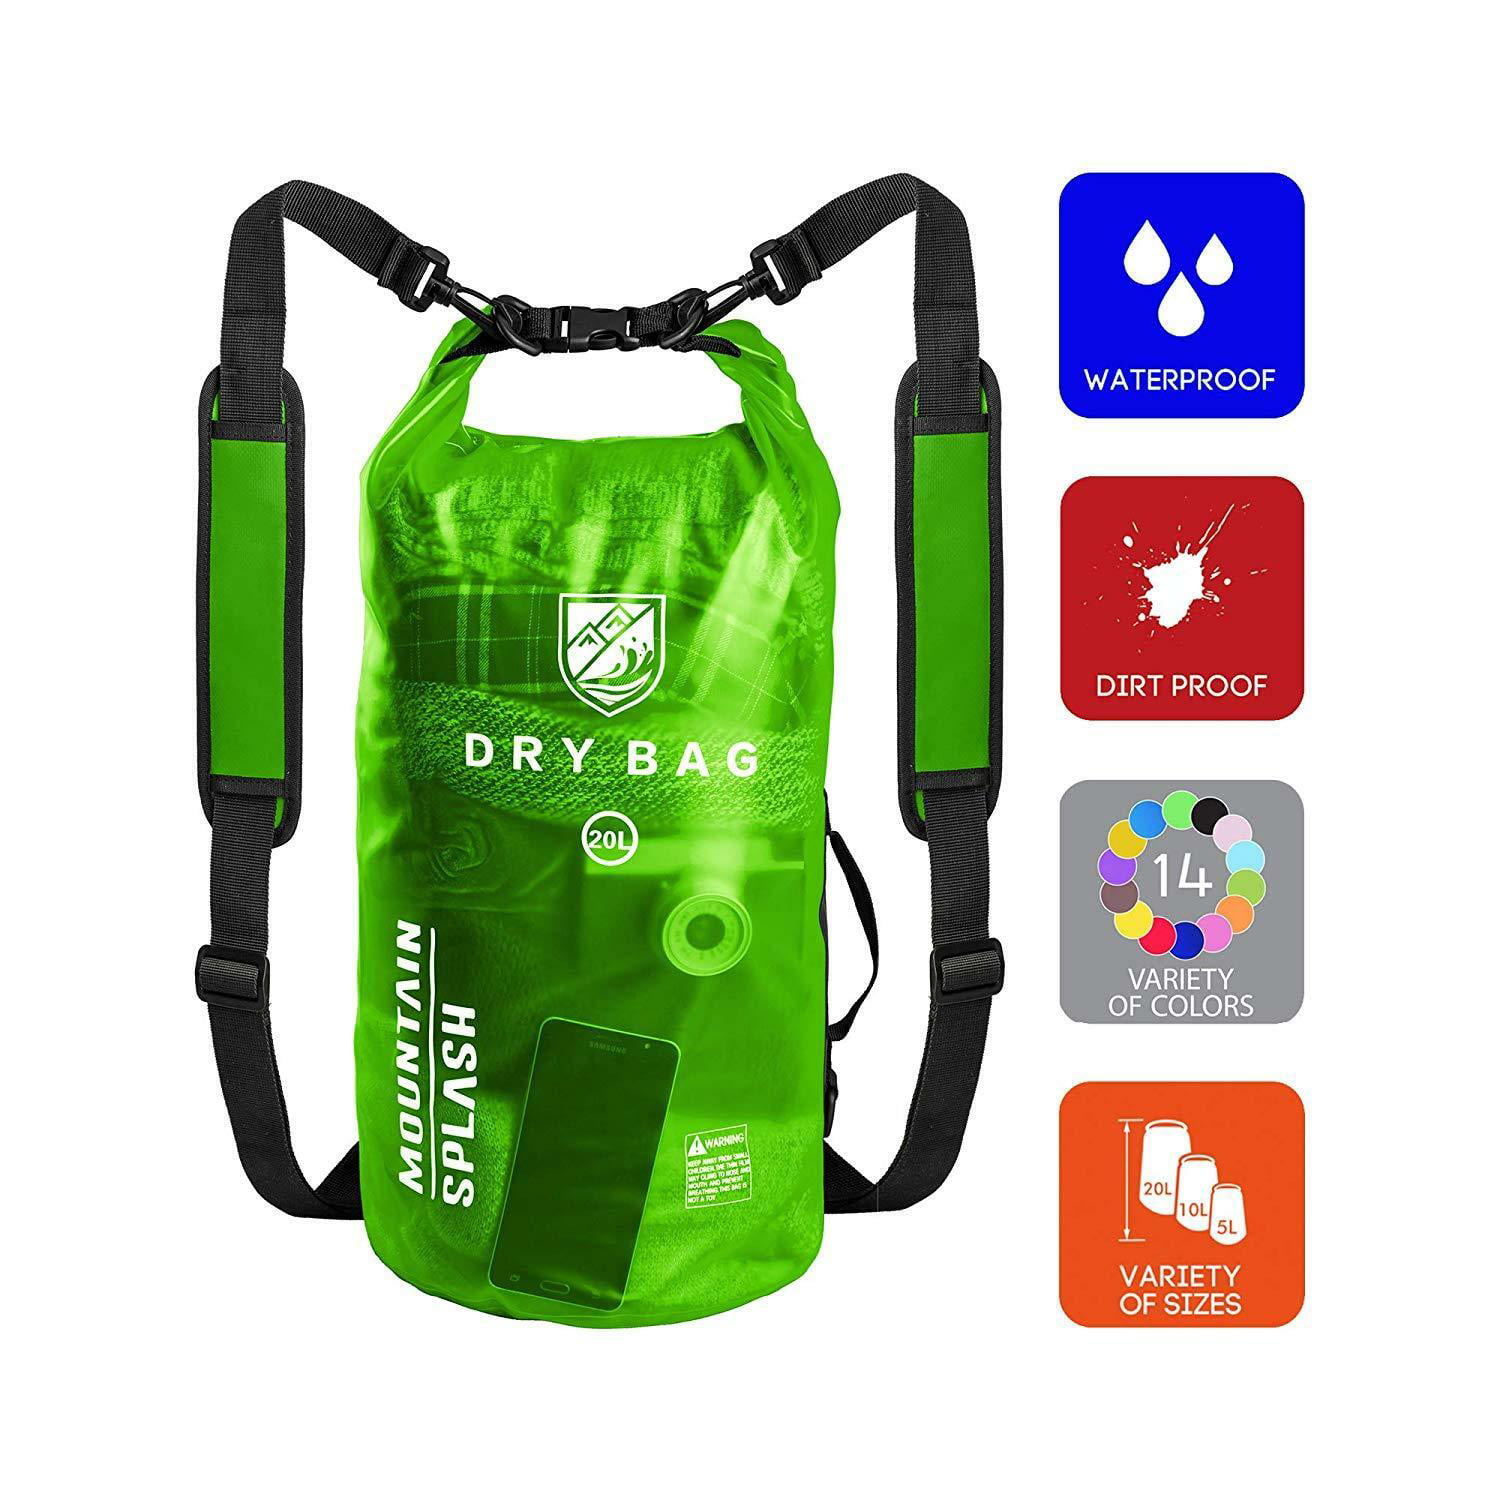 Vacation. Boating Birthday Gift Waterproof Dry Bag 5L/10L/20L-Water Resistant Lightweight Backpack with Handle-Floating Dry Storage Ocean Bag Keeps Gear Impervious to Water-Perfect for Kayaking 